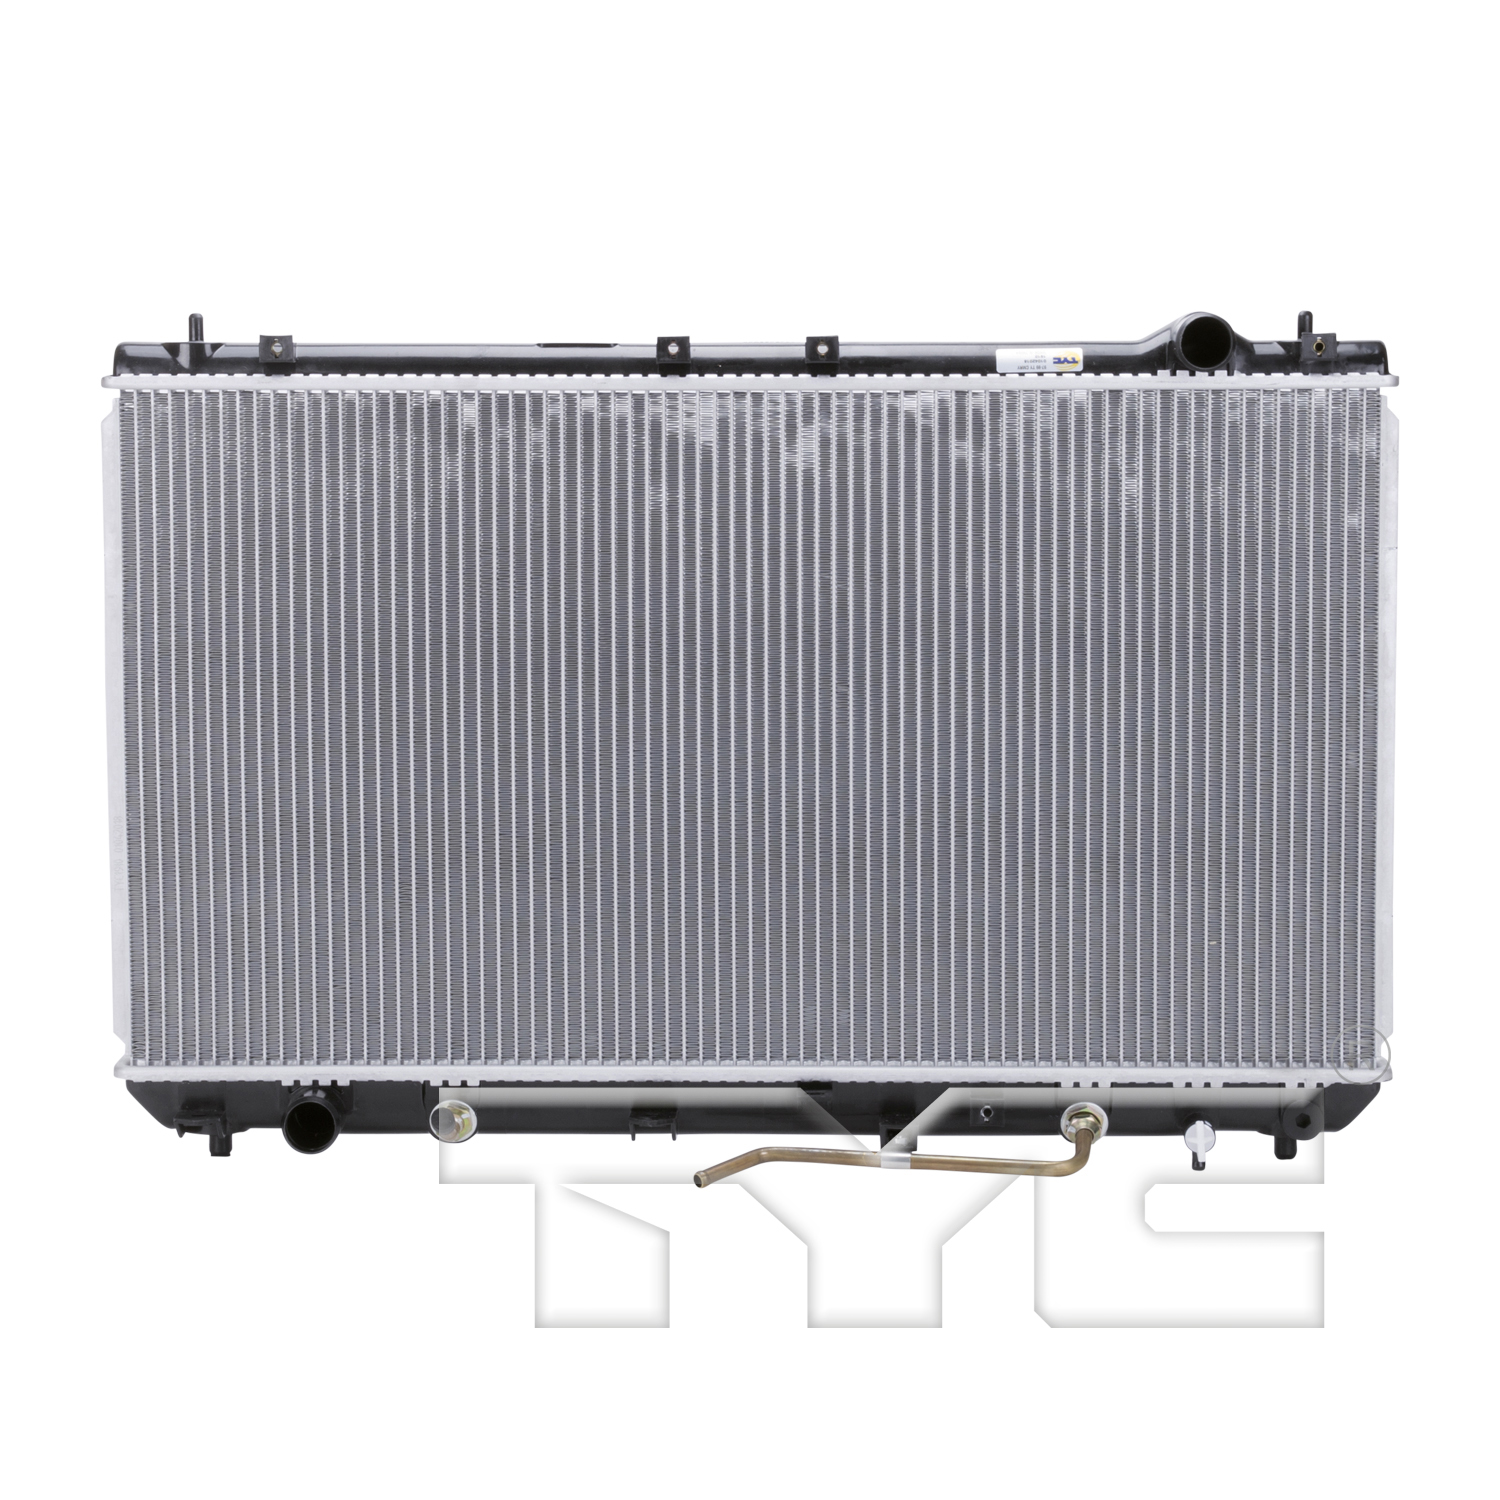 Aftermarket RADIATORS for TOYOTA - CAMRY, CAMRY,97-98,Radiator assembly